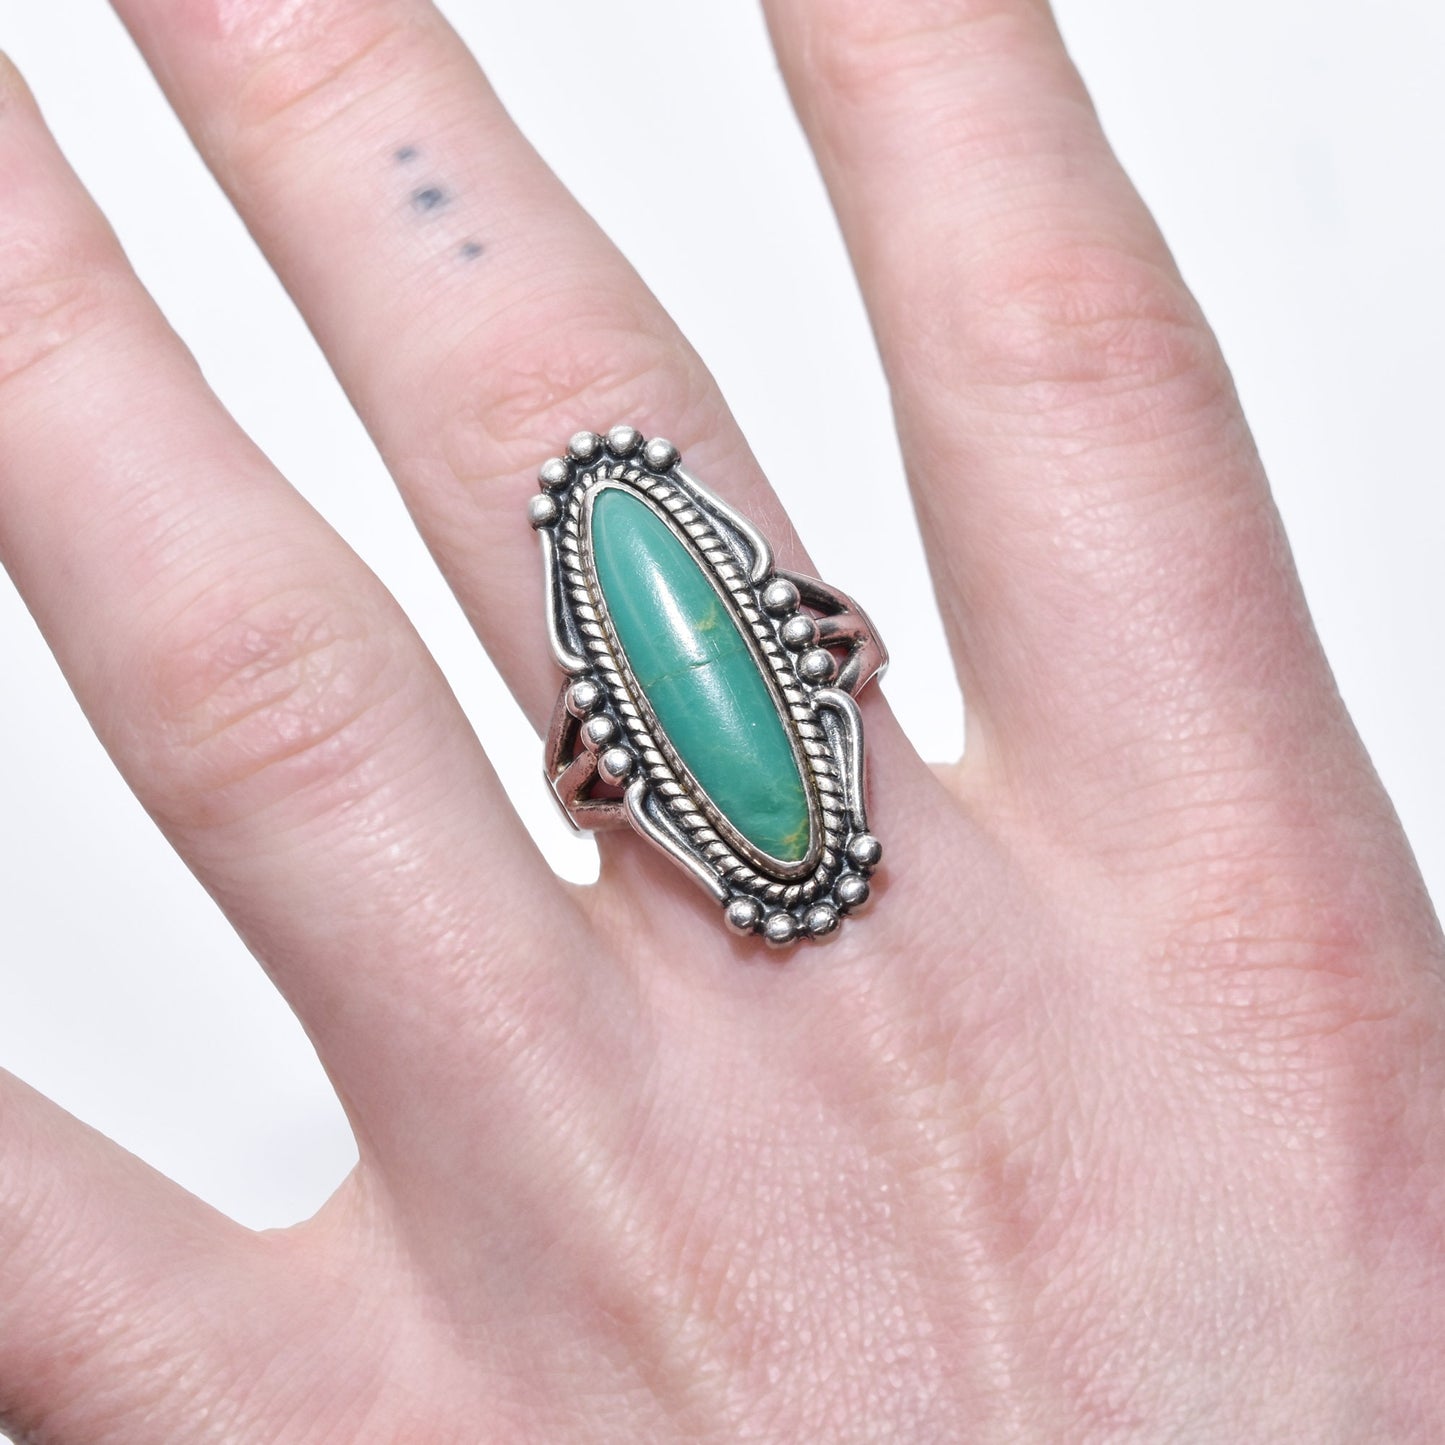 Native American sterling silver turquoise marquise ring on a hand, southwestern jewelry size 8 US